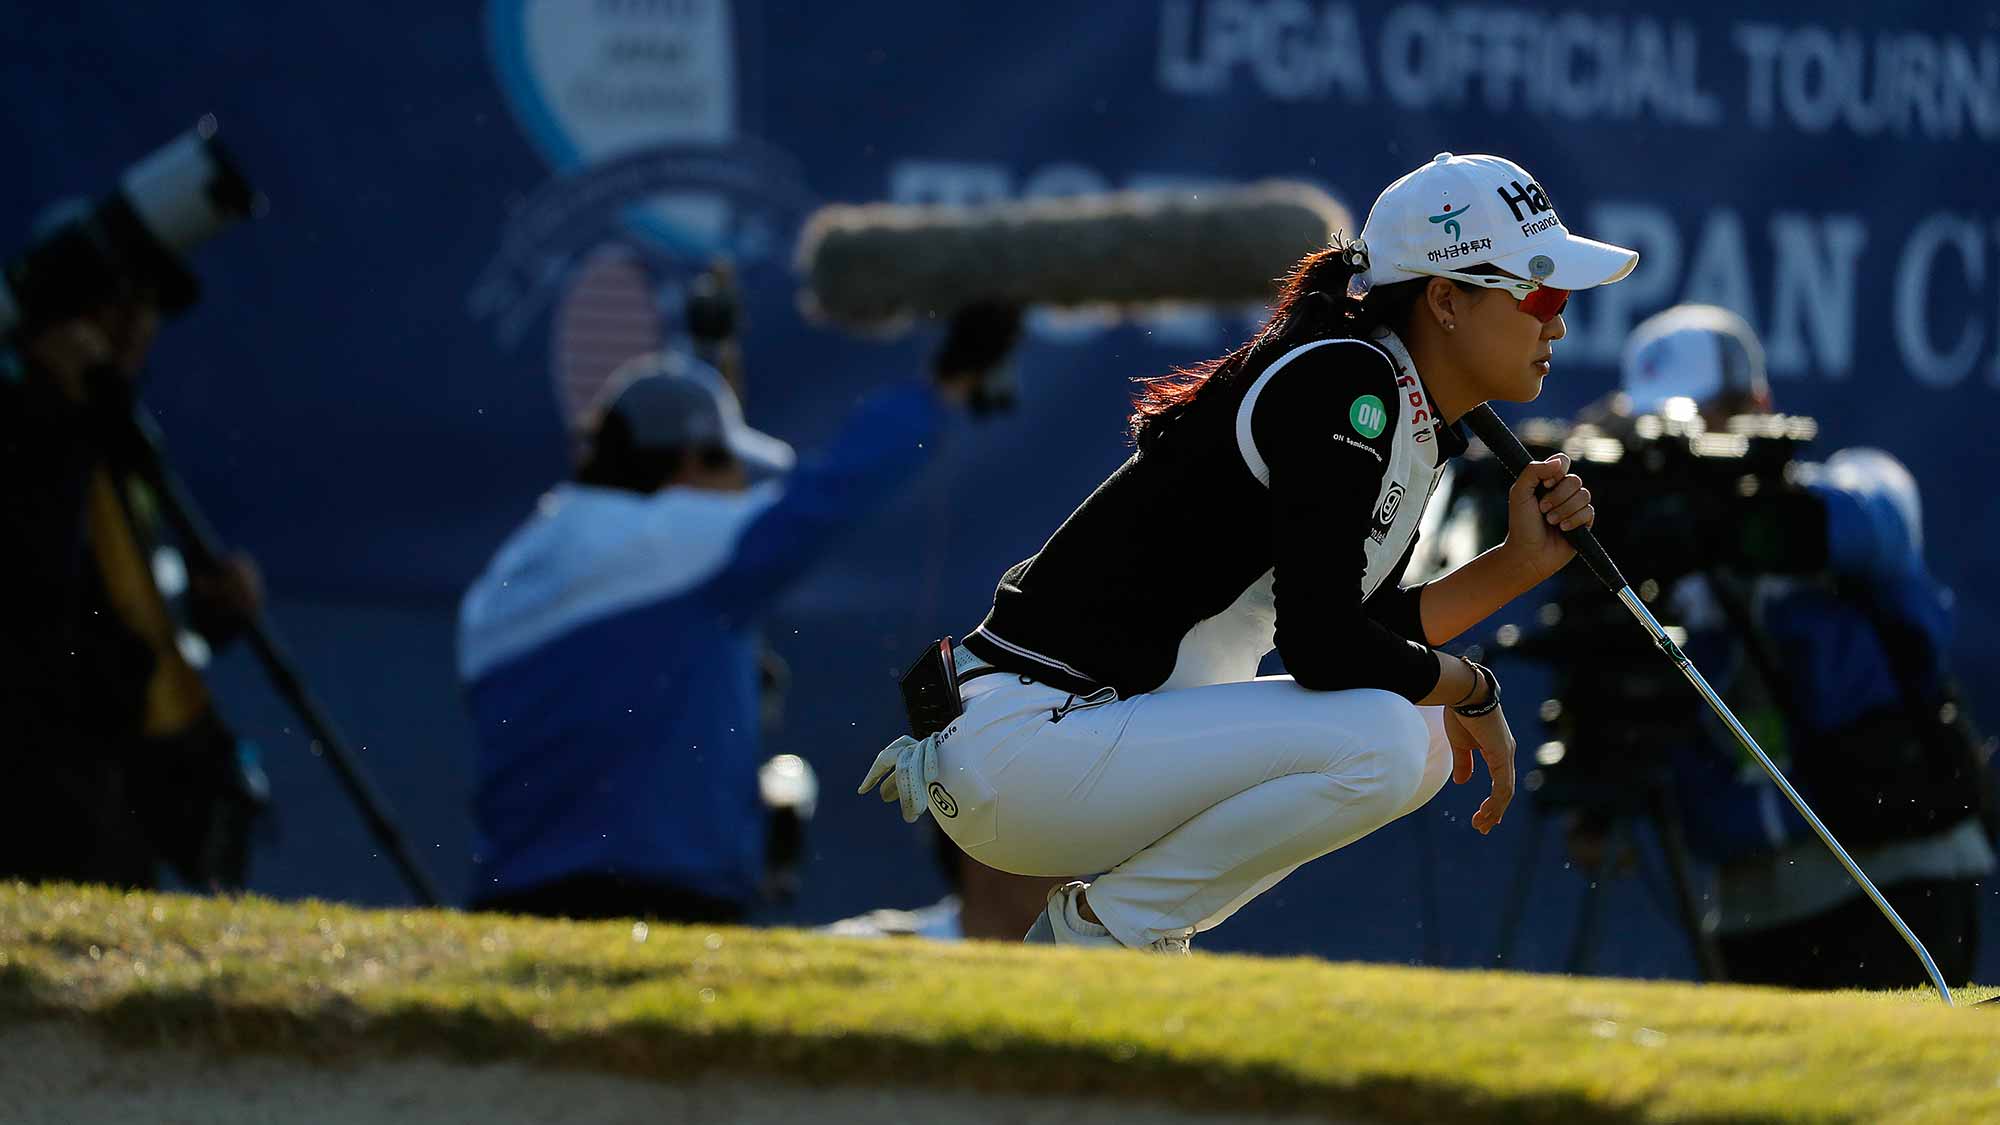 Minjee Lee of Australia prepares to putt on the 18th green during the second round of the TOTO Japan Classic at Seta Golf Course on November 03, 2018 in Otsu, Shiga, Japan